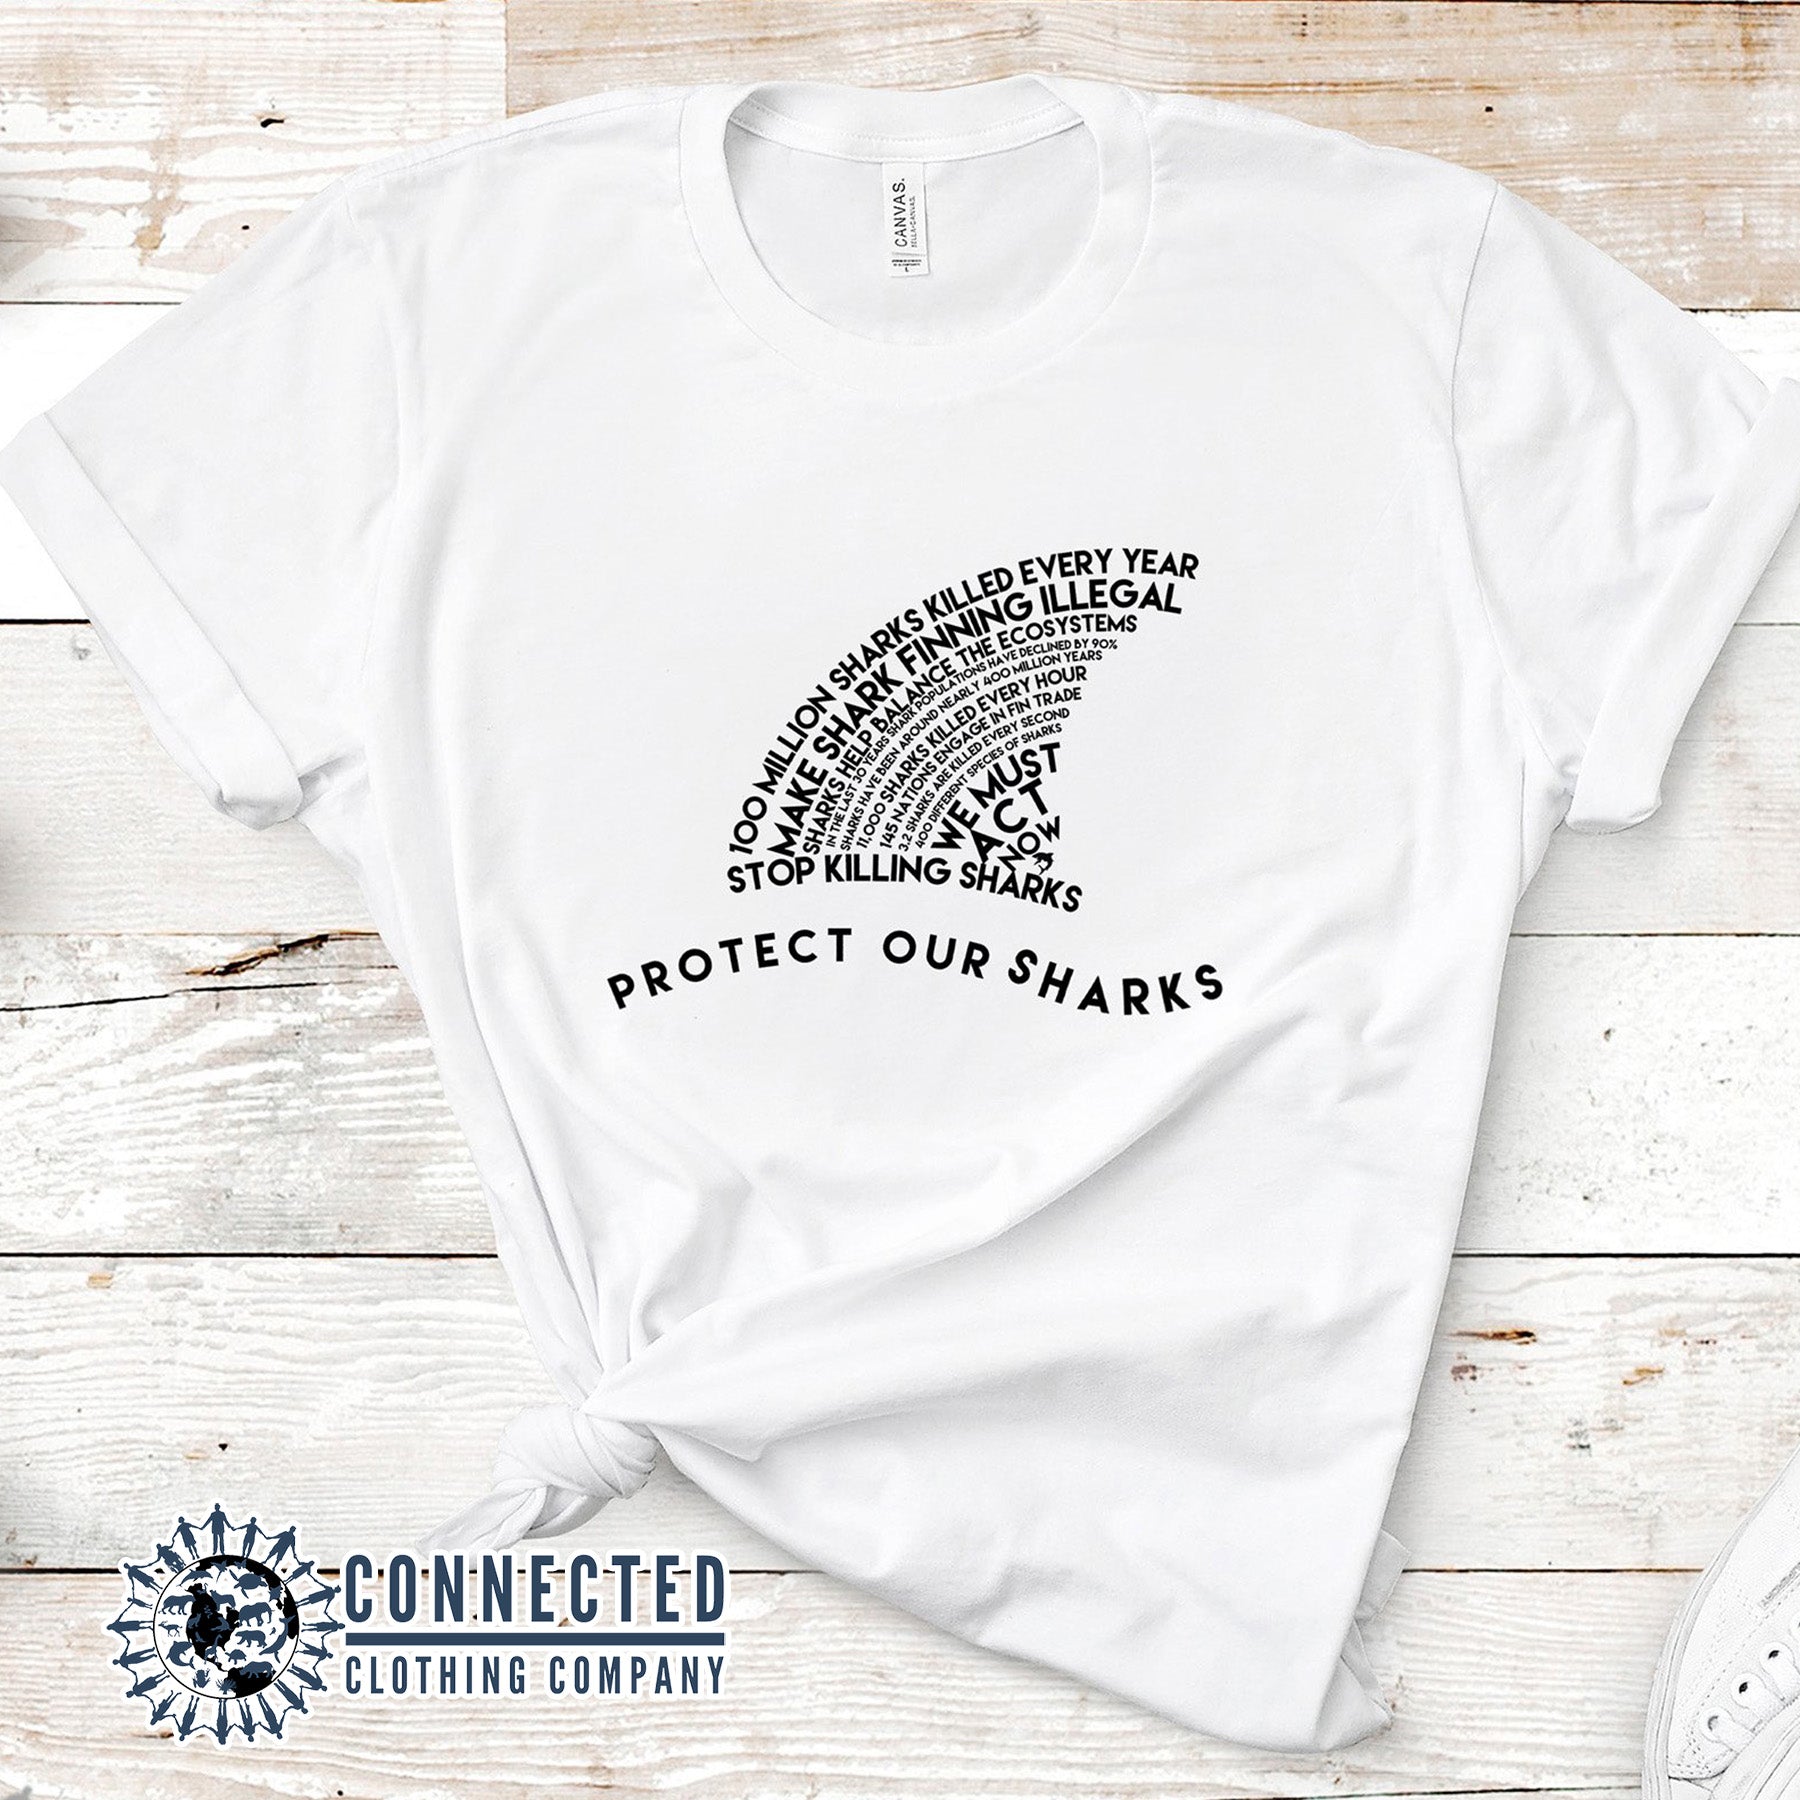 White Protect Our Sharks Short-Sleeve Tee - nighttidemetalworks - Ethically and Sustainably Made - 10% of profits donated to shark conservation and ocean conservation